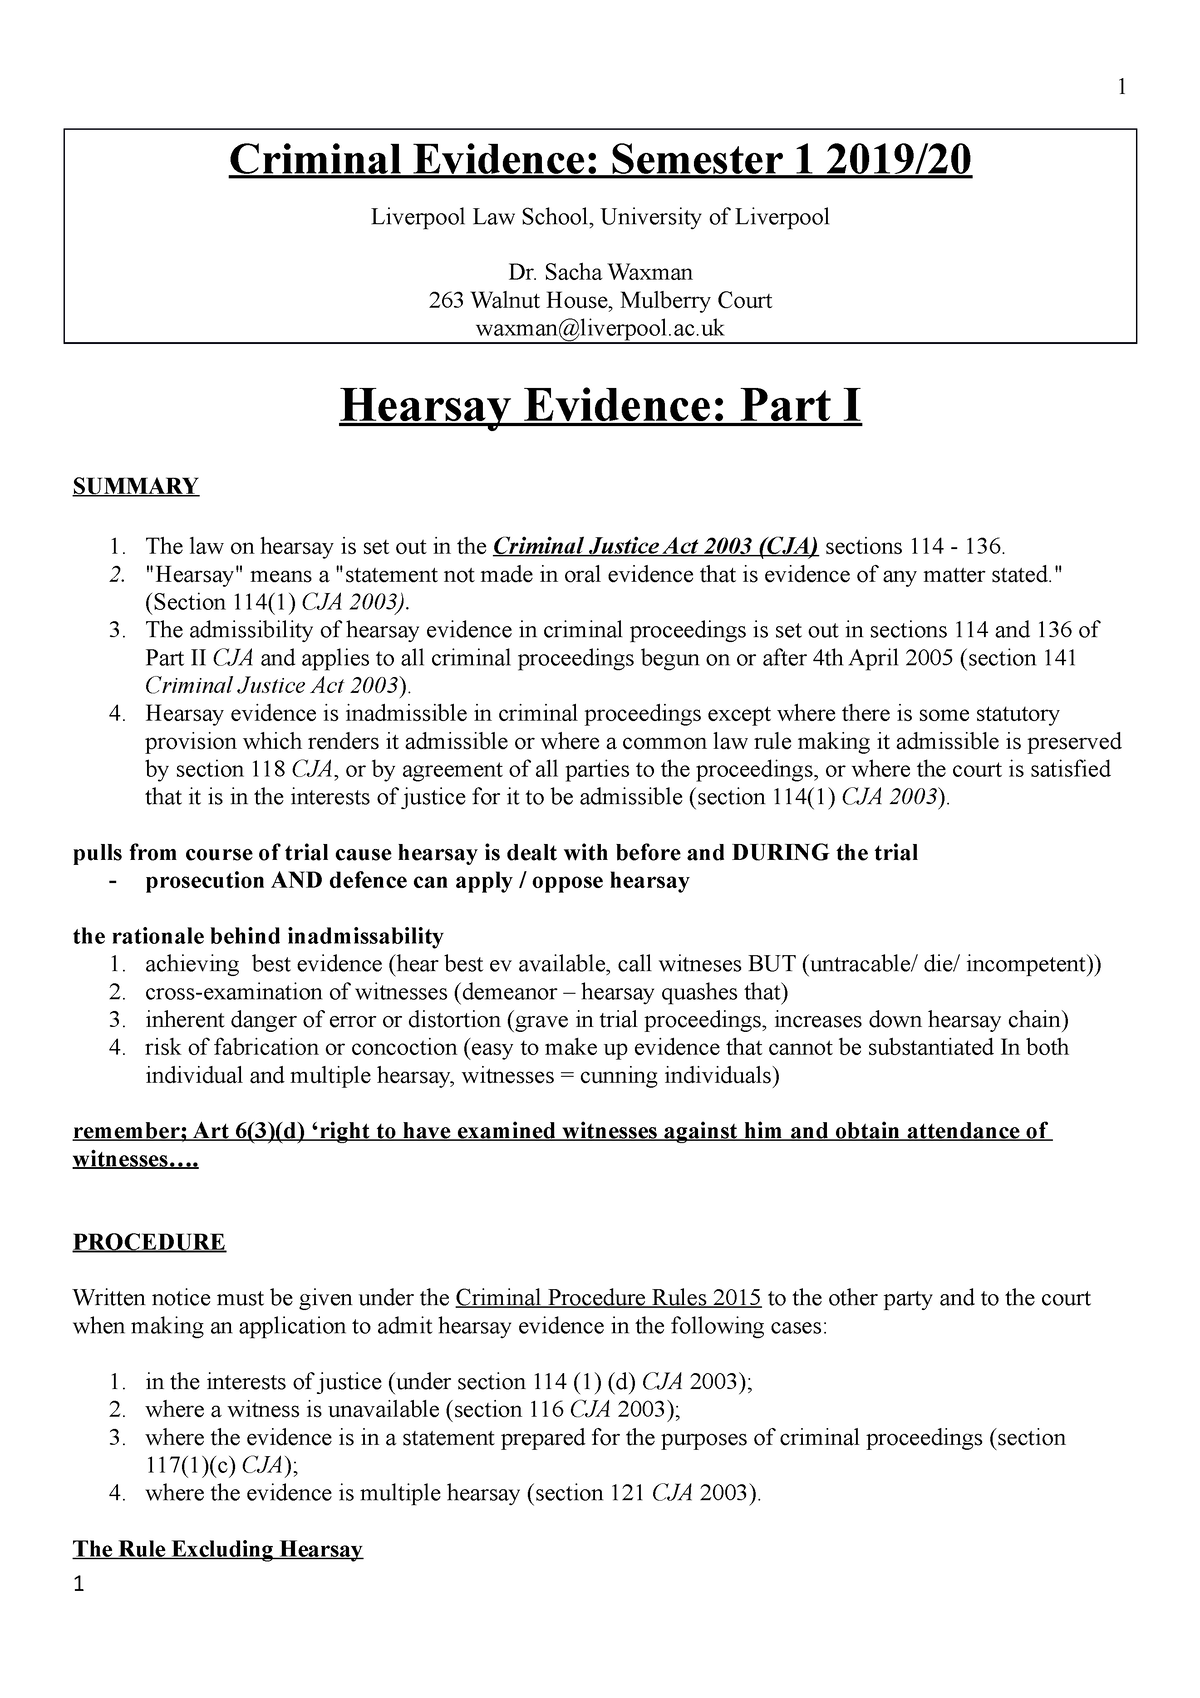 week-8-and-9-hearsay-criminal-evidence-law-003-lecture-handout-notes